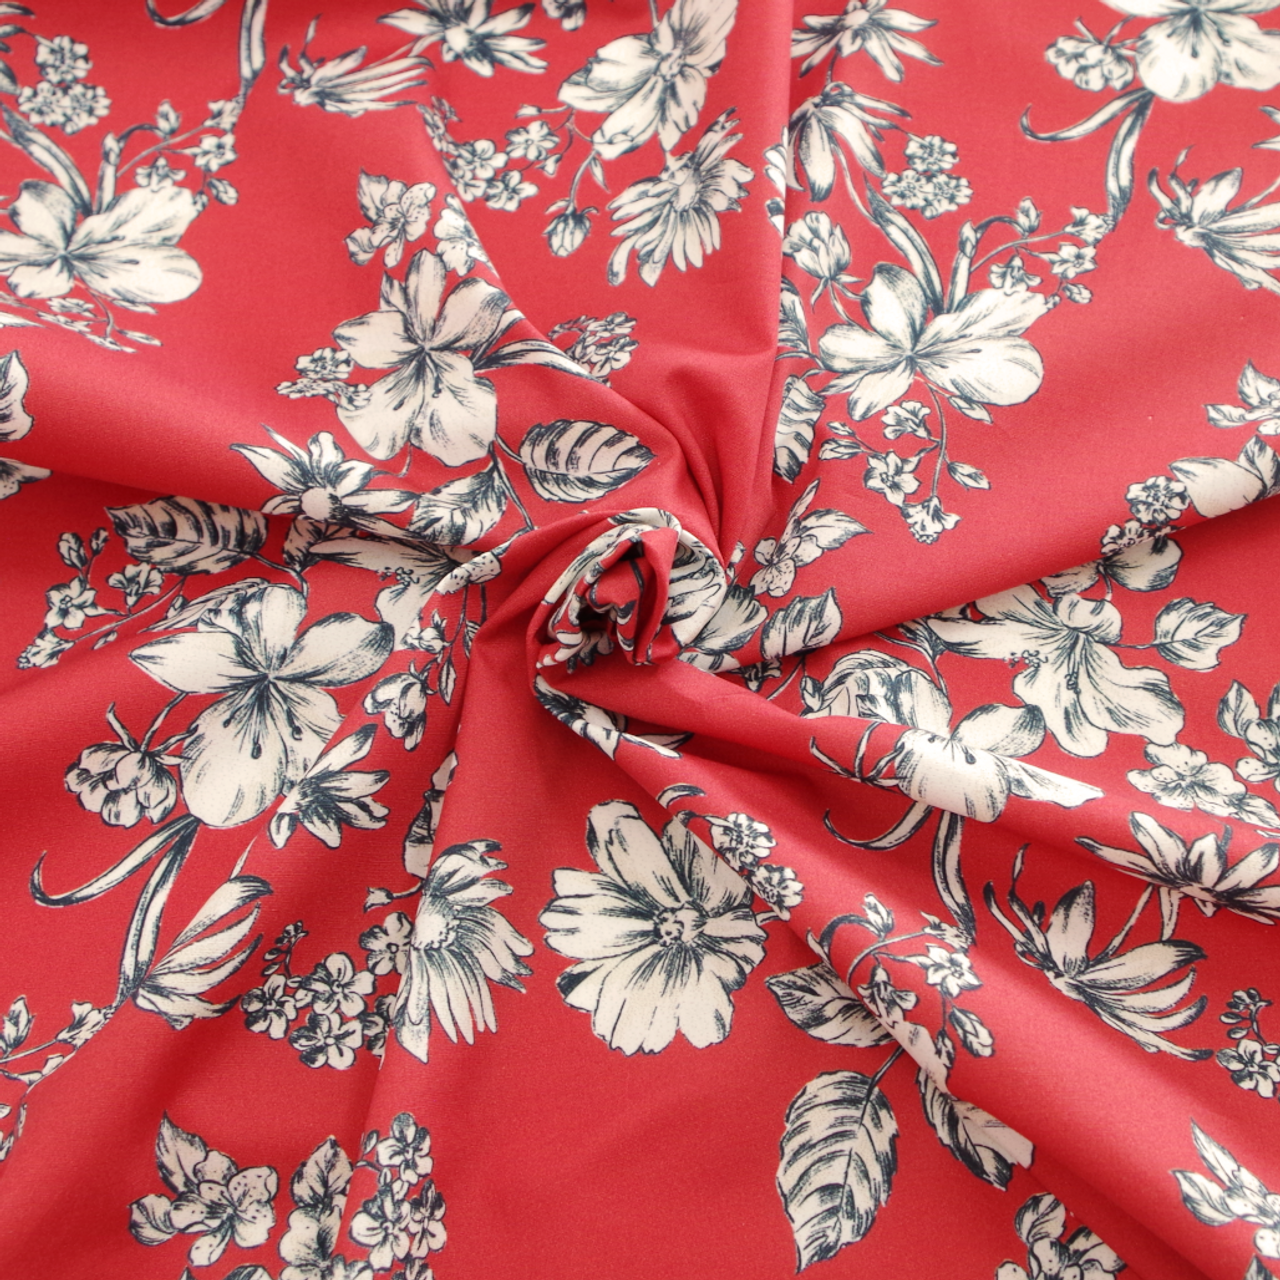 Flower printed red cotton poplin. Designer deadstock fabric cut to length.  Sold by units of 10 cm (1 mt= 10 units)